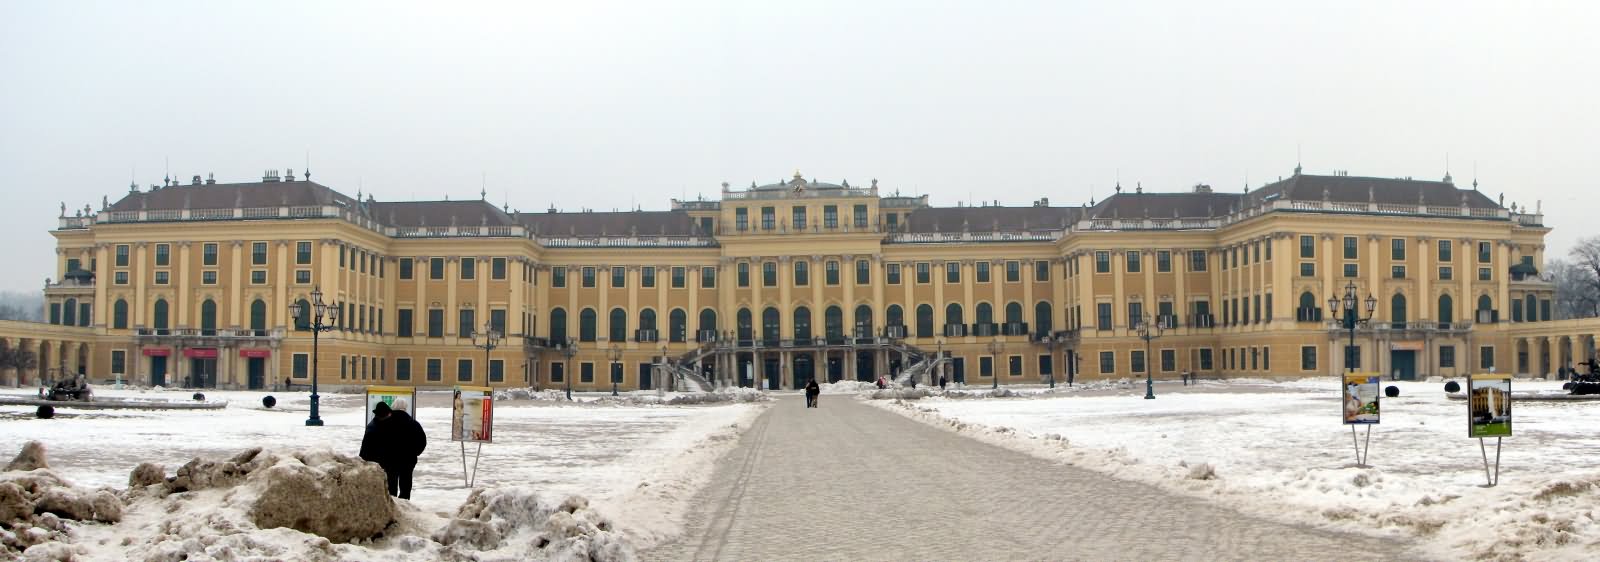 Northern View Of The Schonbrunn Palace In Vienna